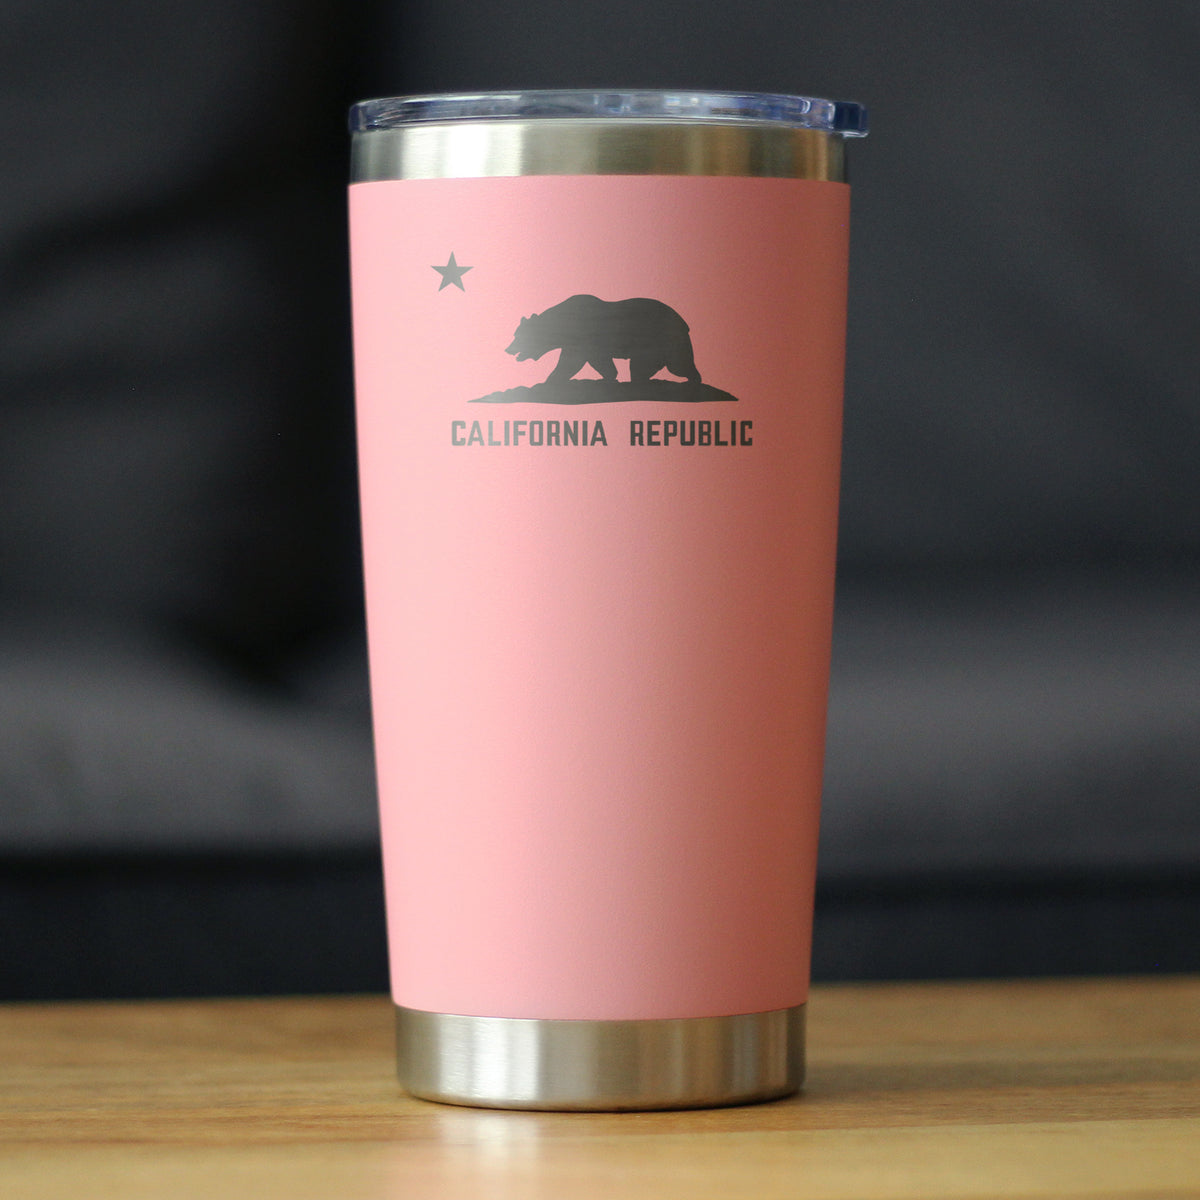 Flag of California - Insulated Coffee Tumbler Cup with Sliding Lid - Stainless Steel Travel Mug - California Gifts for Women and Men Californians